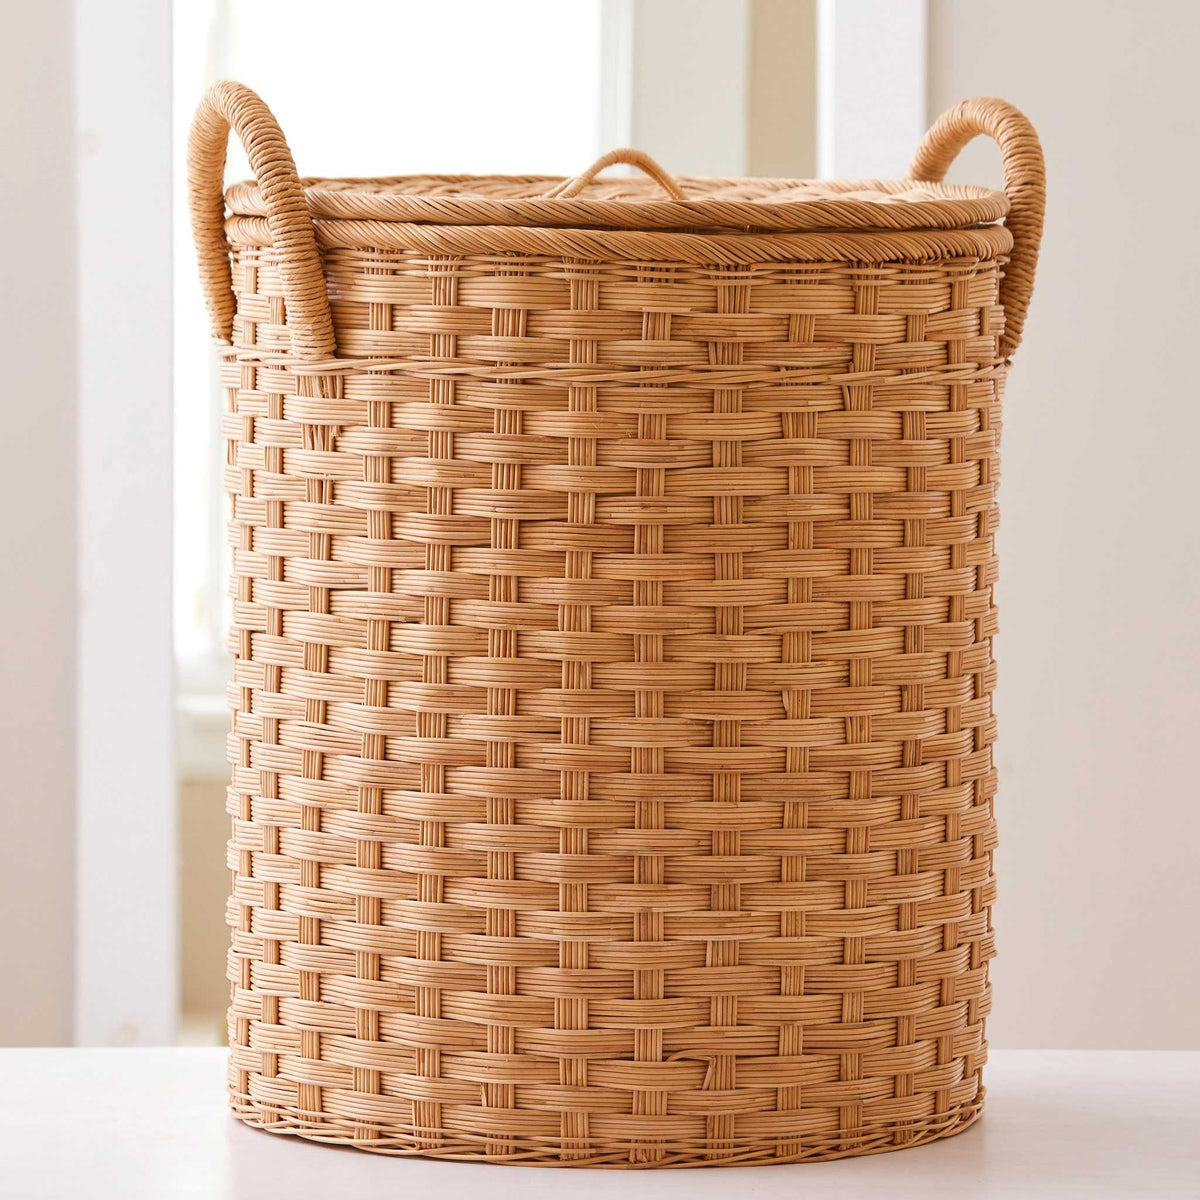 Round rattan storage basket. Unique storage baskets with lid and handles. 5 sizes. Extra Large shown. Great basket for storage. XL, L, M, S, XS.